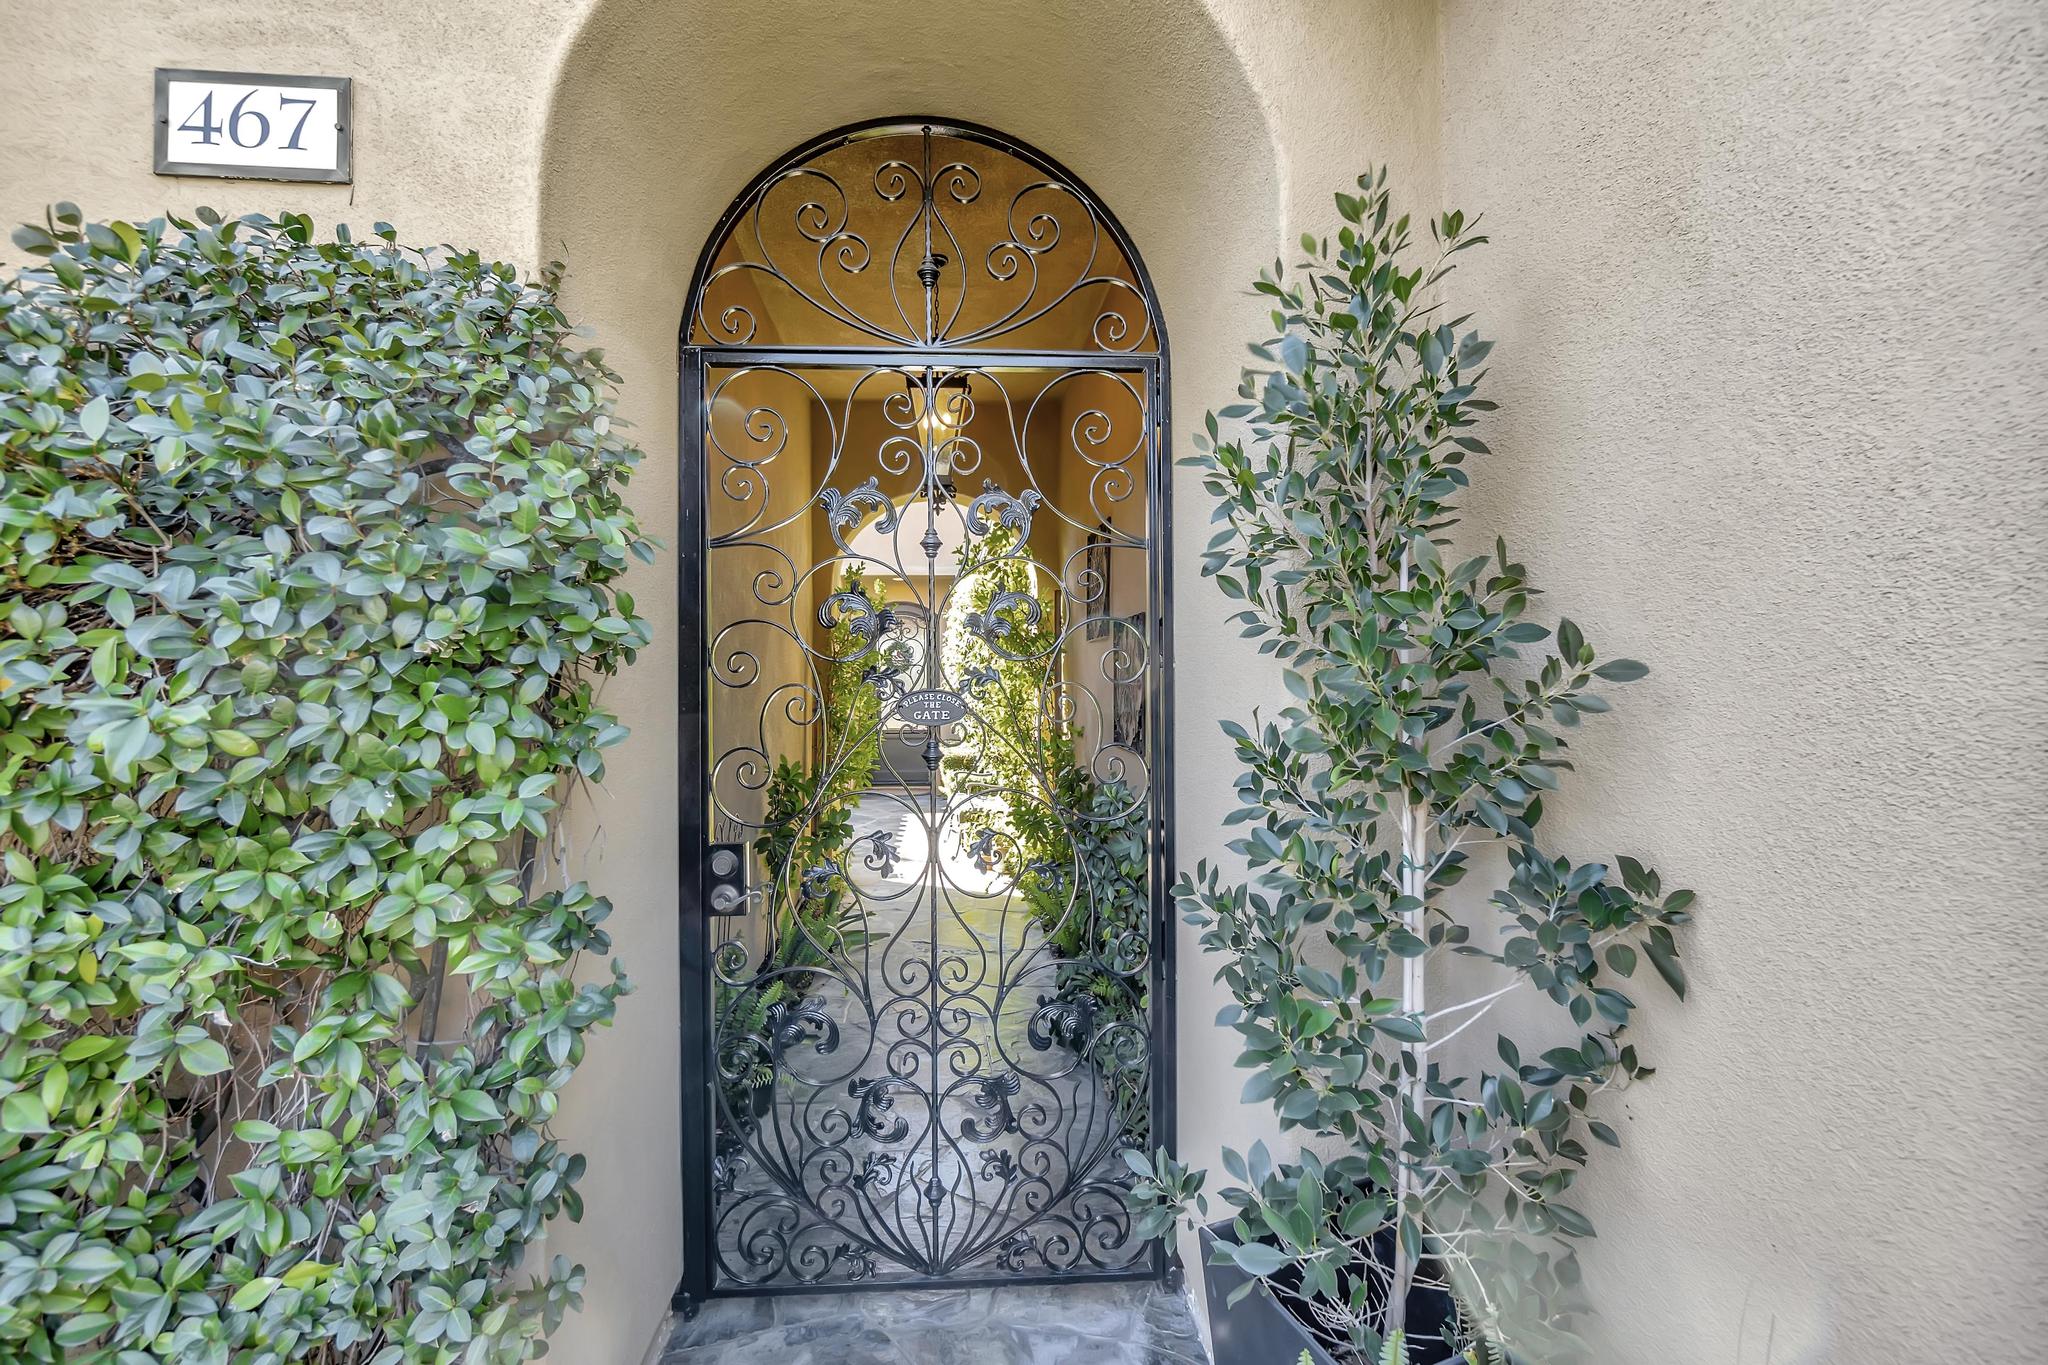 Tuscan-Inspired Olinda Ranch Villa – 467 Tangerine Place, Brea, CA 92823 - Front Facing View of Front Gate